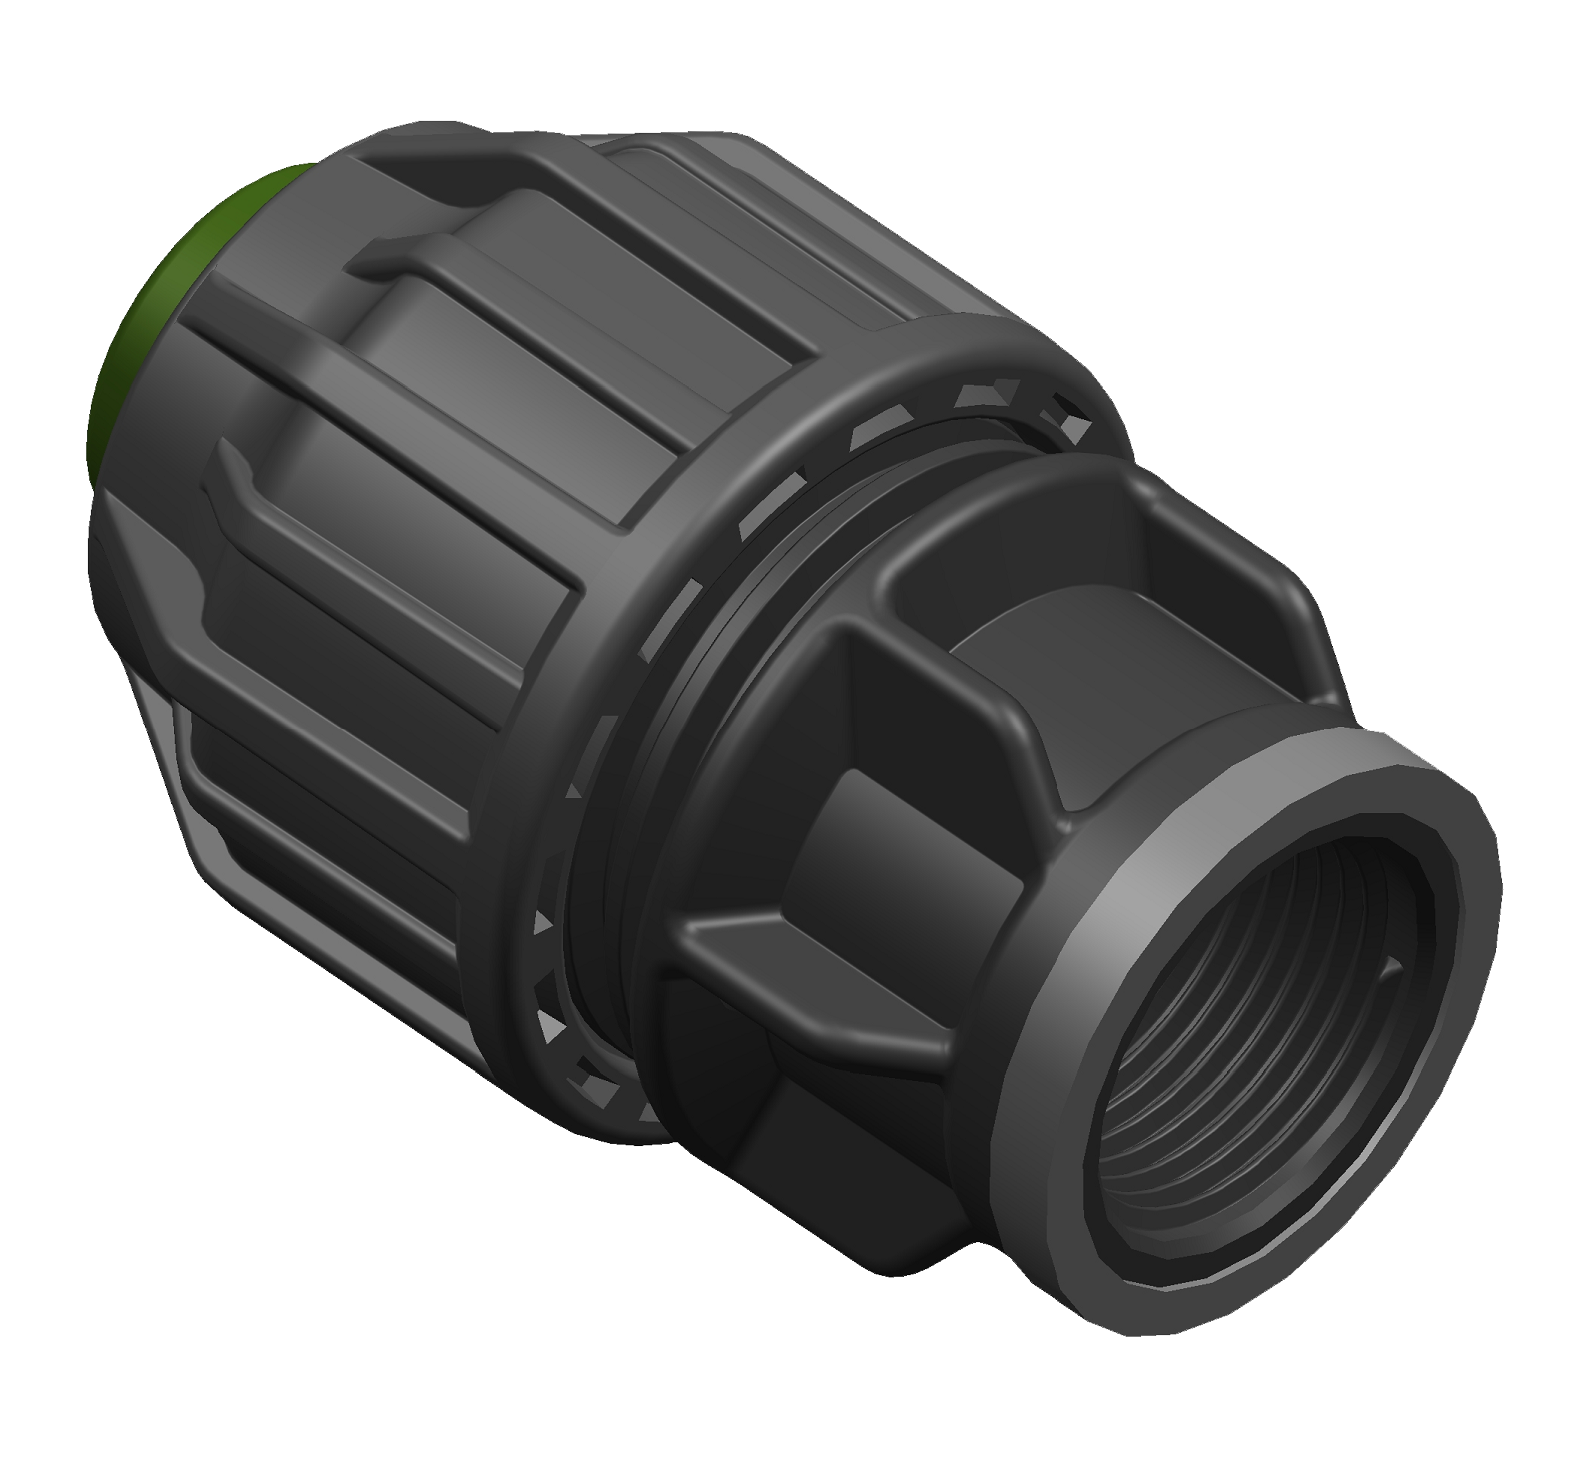 A 3D rendering of a rural compression female adaptor.